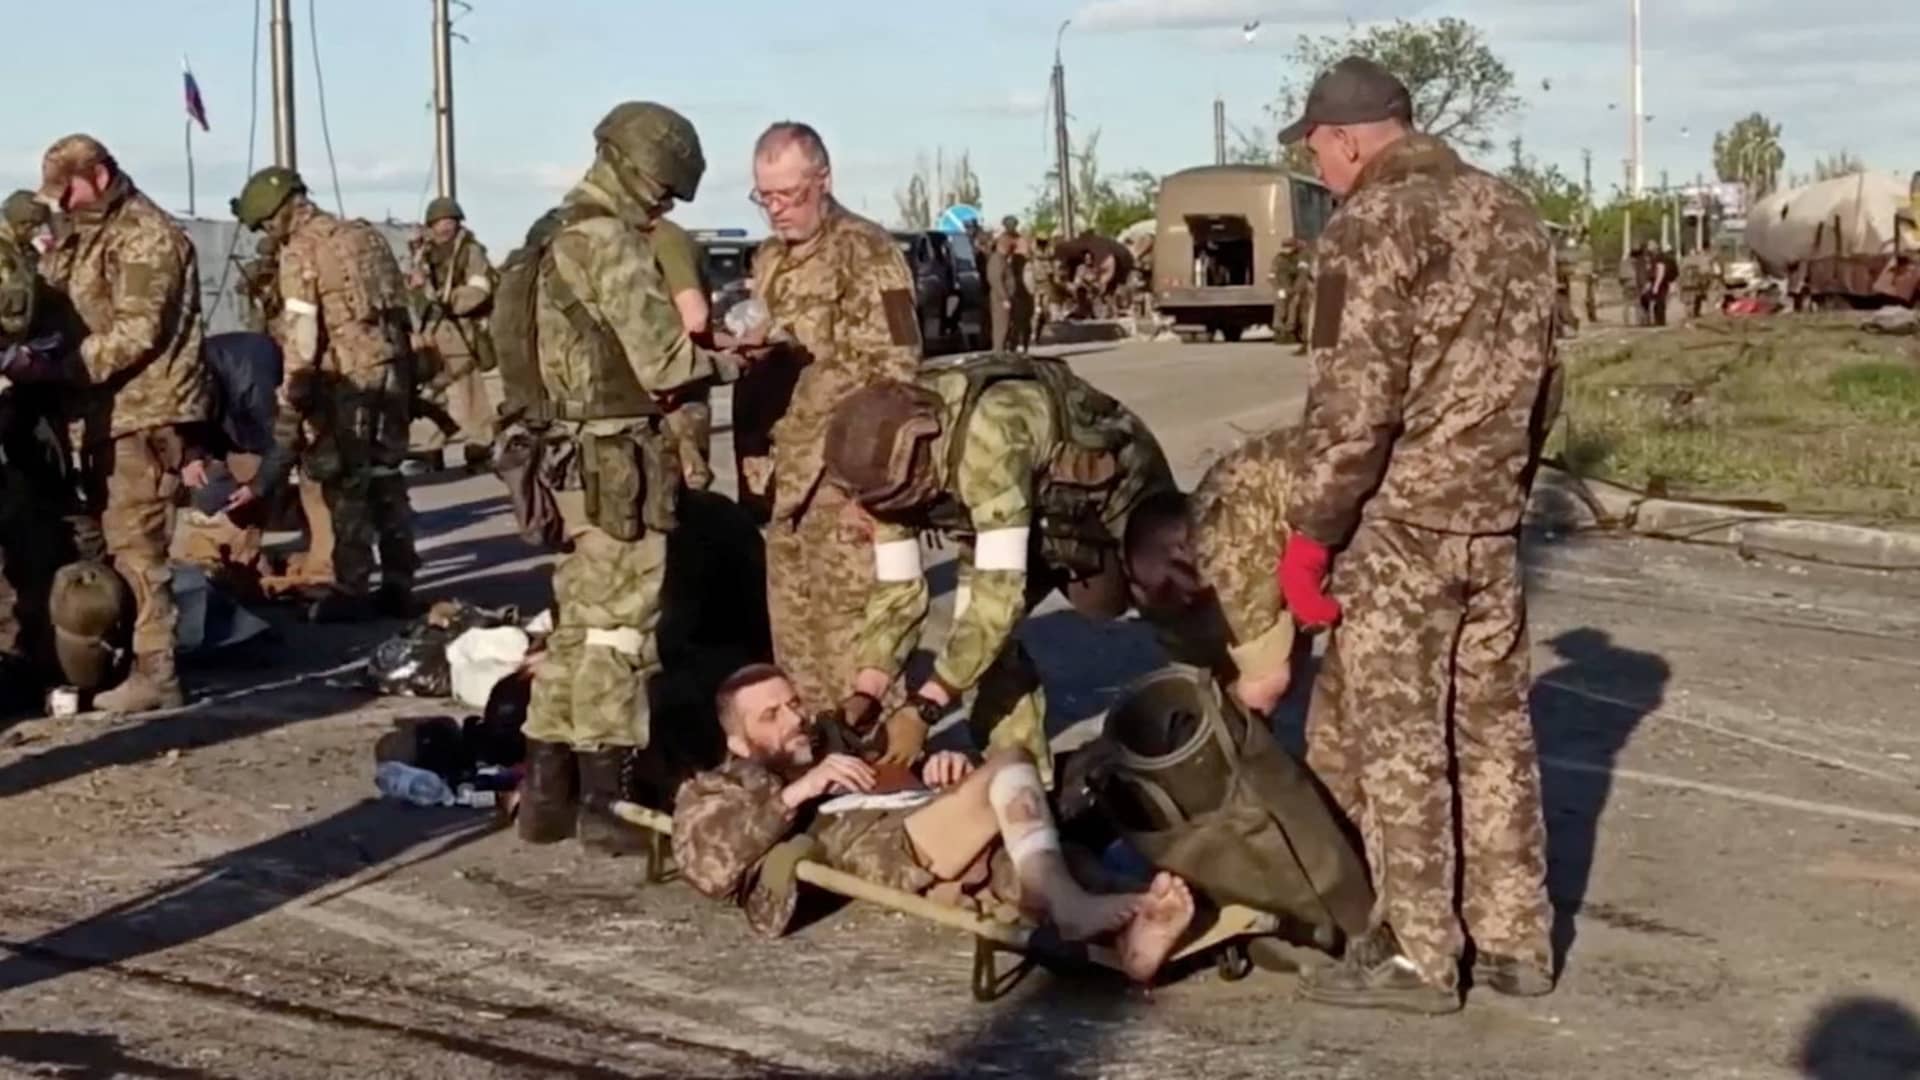 A still image taken from a video released by Russian Defence Ministry shows what it claims are service members of Ukrainian forces, who left the besieged Azovstal steel plant, being searched by the pro-Russian military in Mariupol, Ukraine. Video released May 17, 2022.